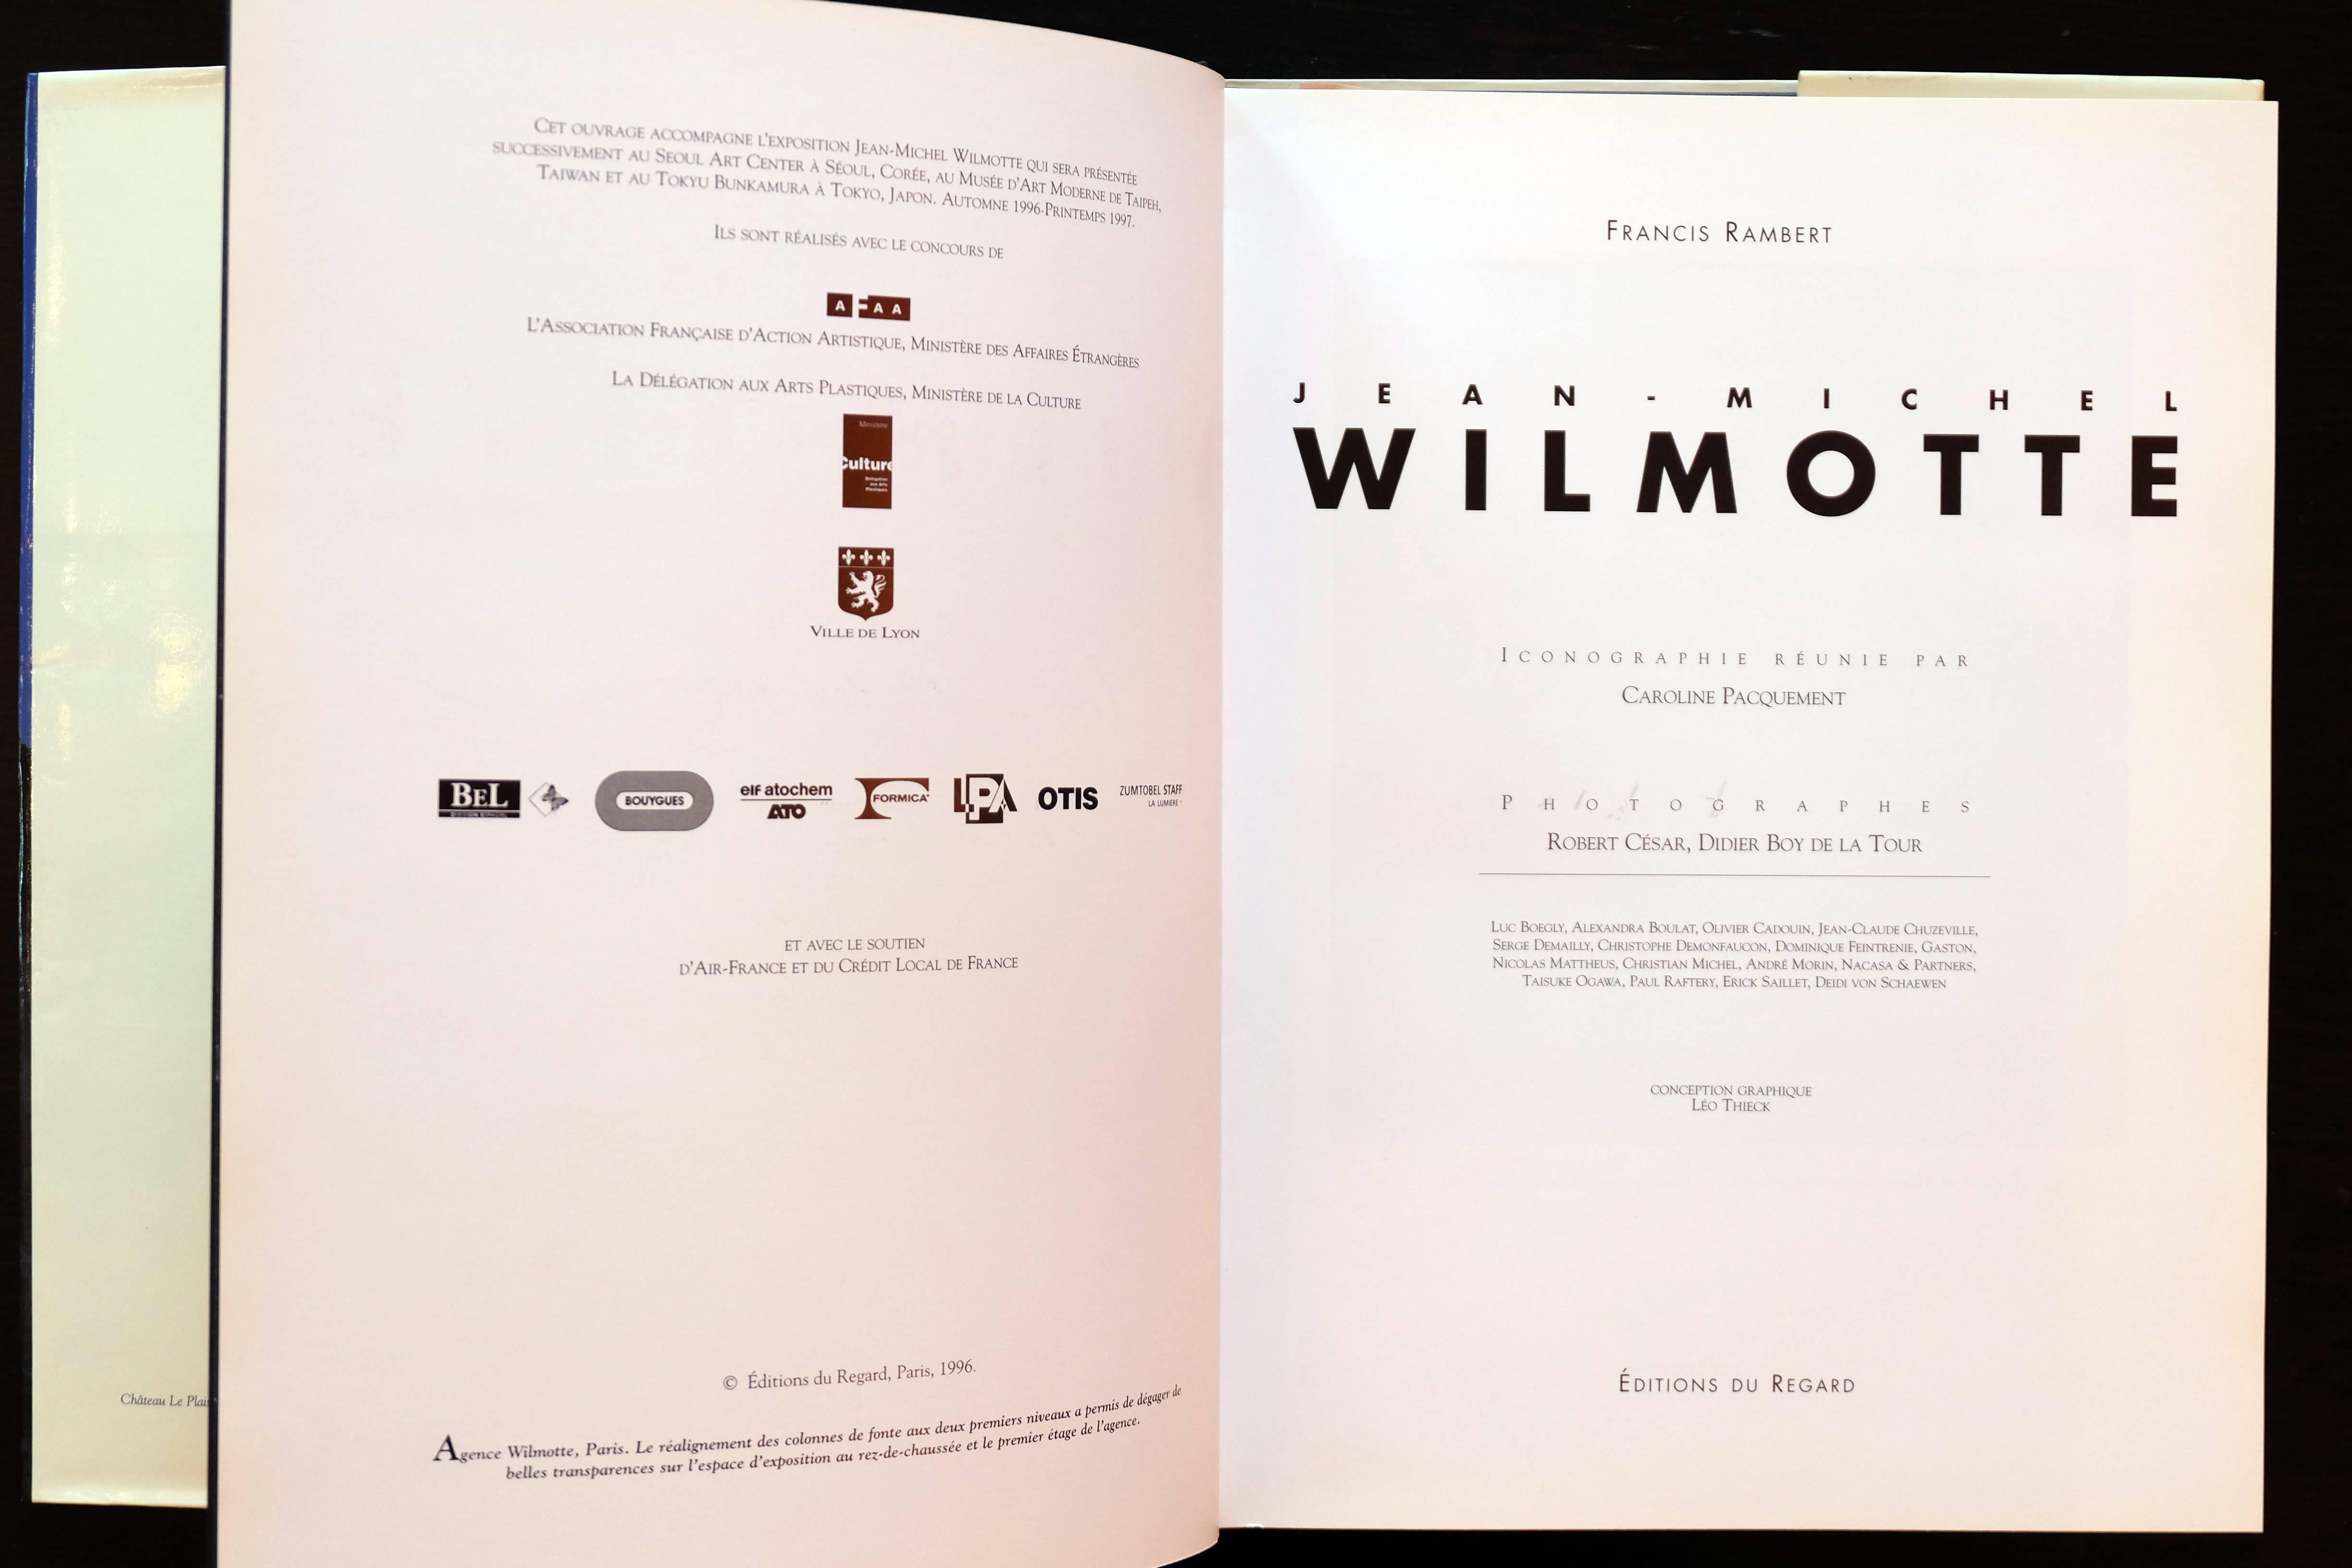 Rare book about French architect Jean-Michel Wilmotte by Francis Rambert for Editions du Regards edition 1996
An overview of the famous French architect works
Plans, sketches, fotos
250 pages
A must have for collector.